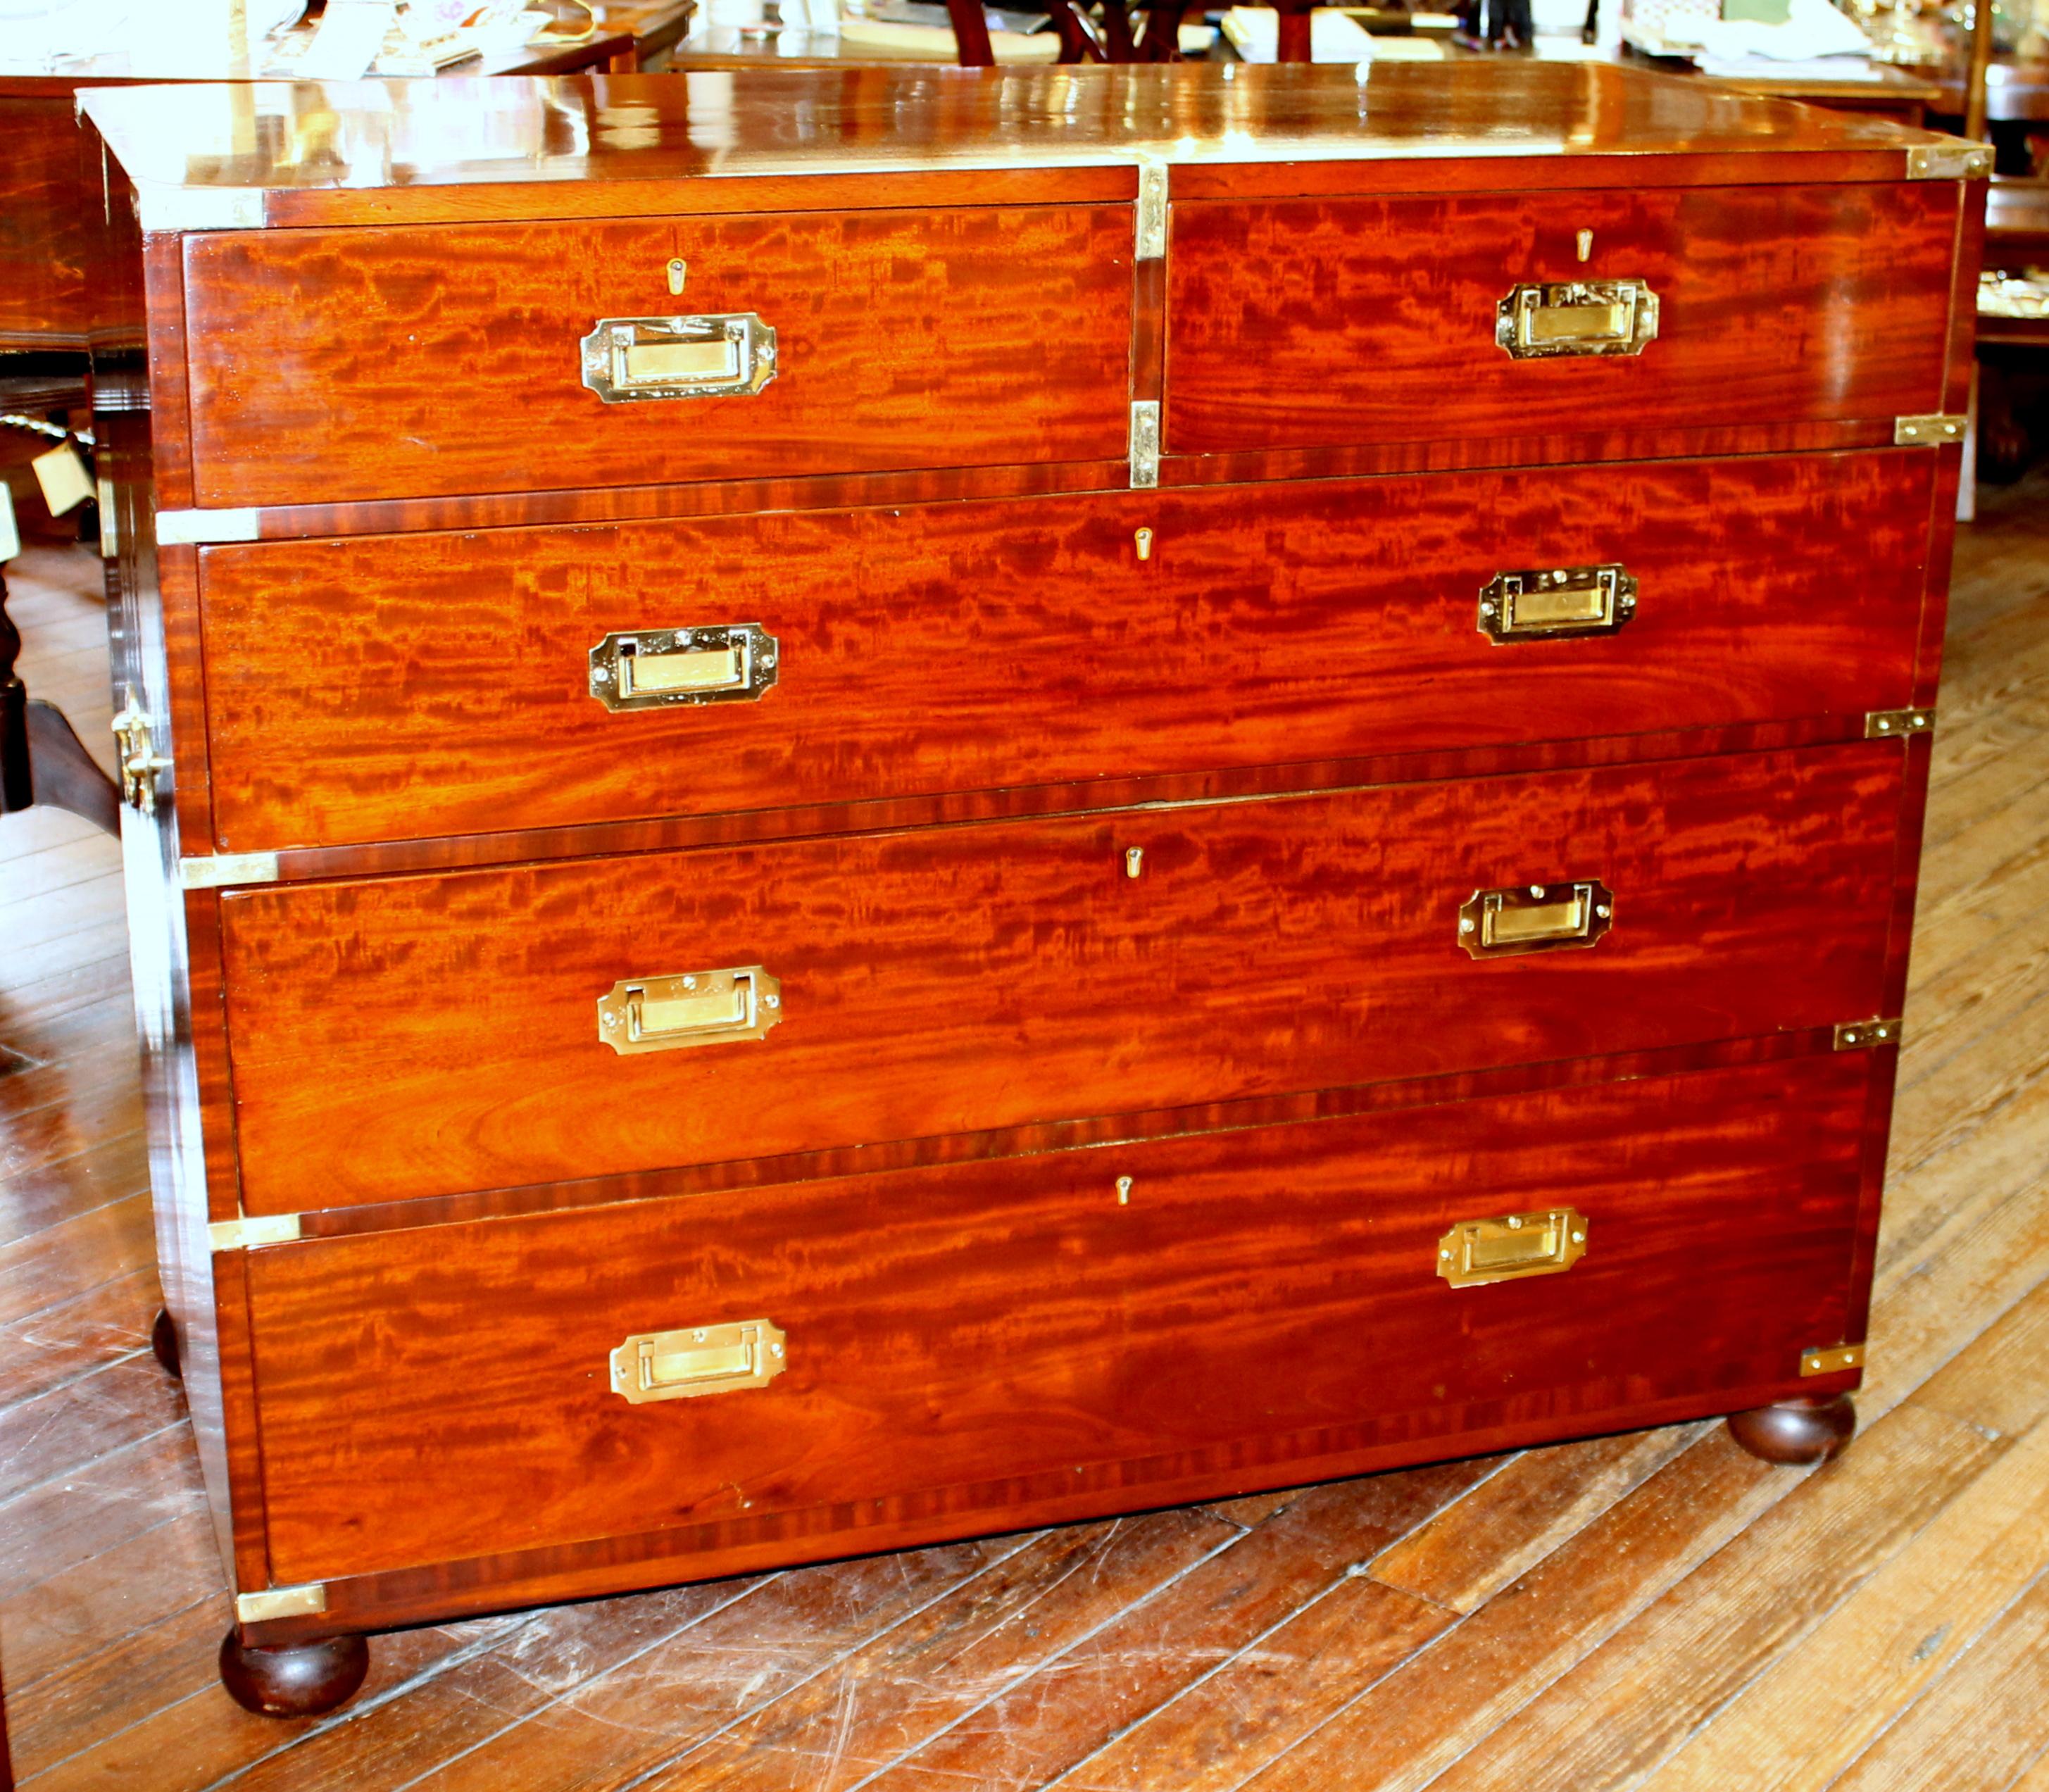 Cross-Banded Antique English Inlaid Figured Mahogany Campaign/Military Style Chest of Drawers